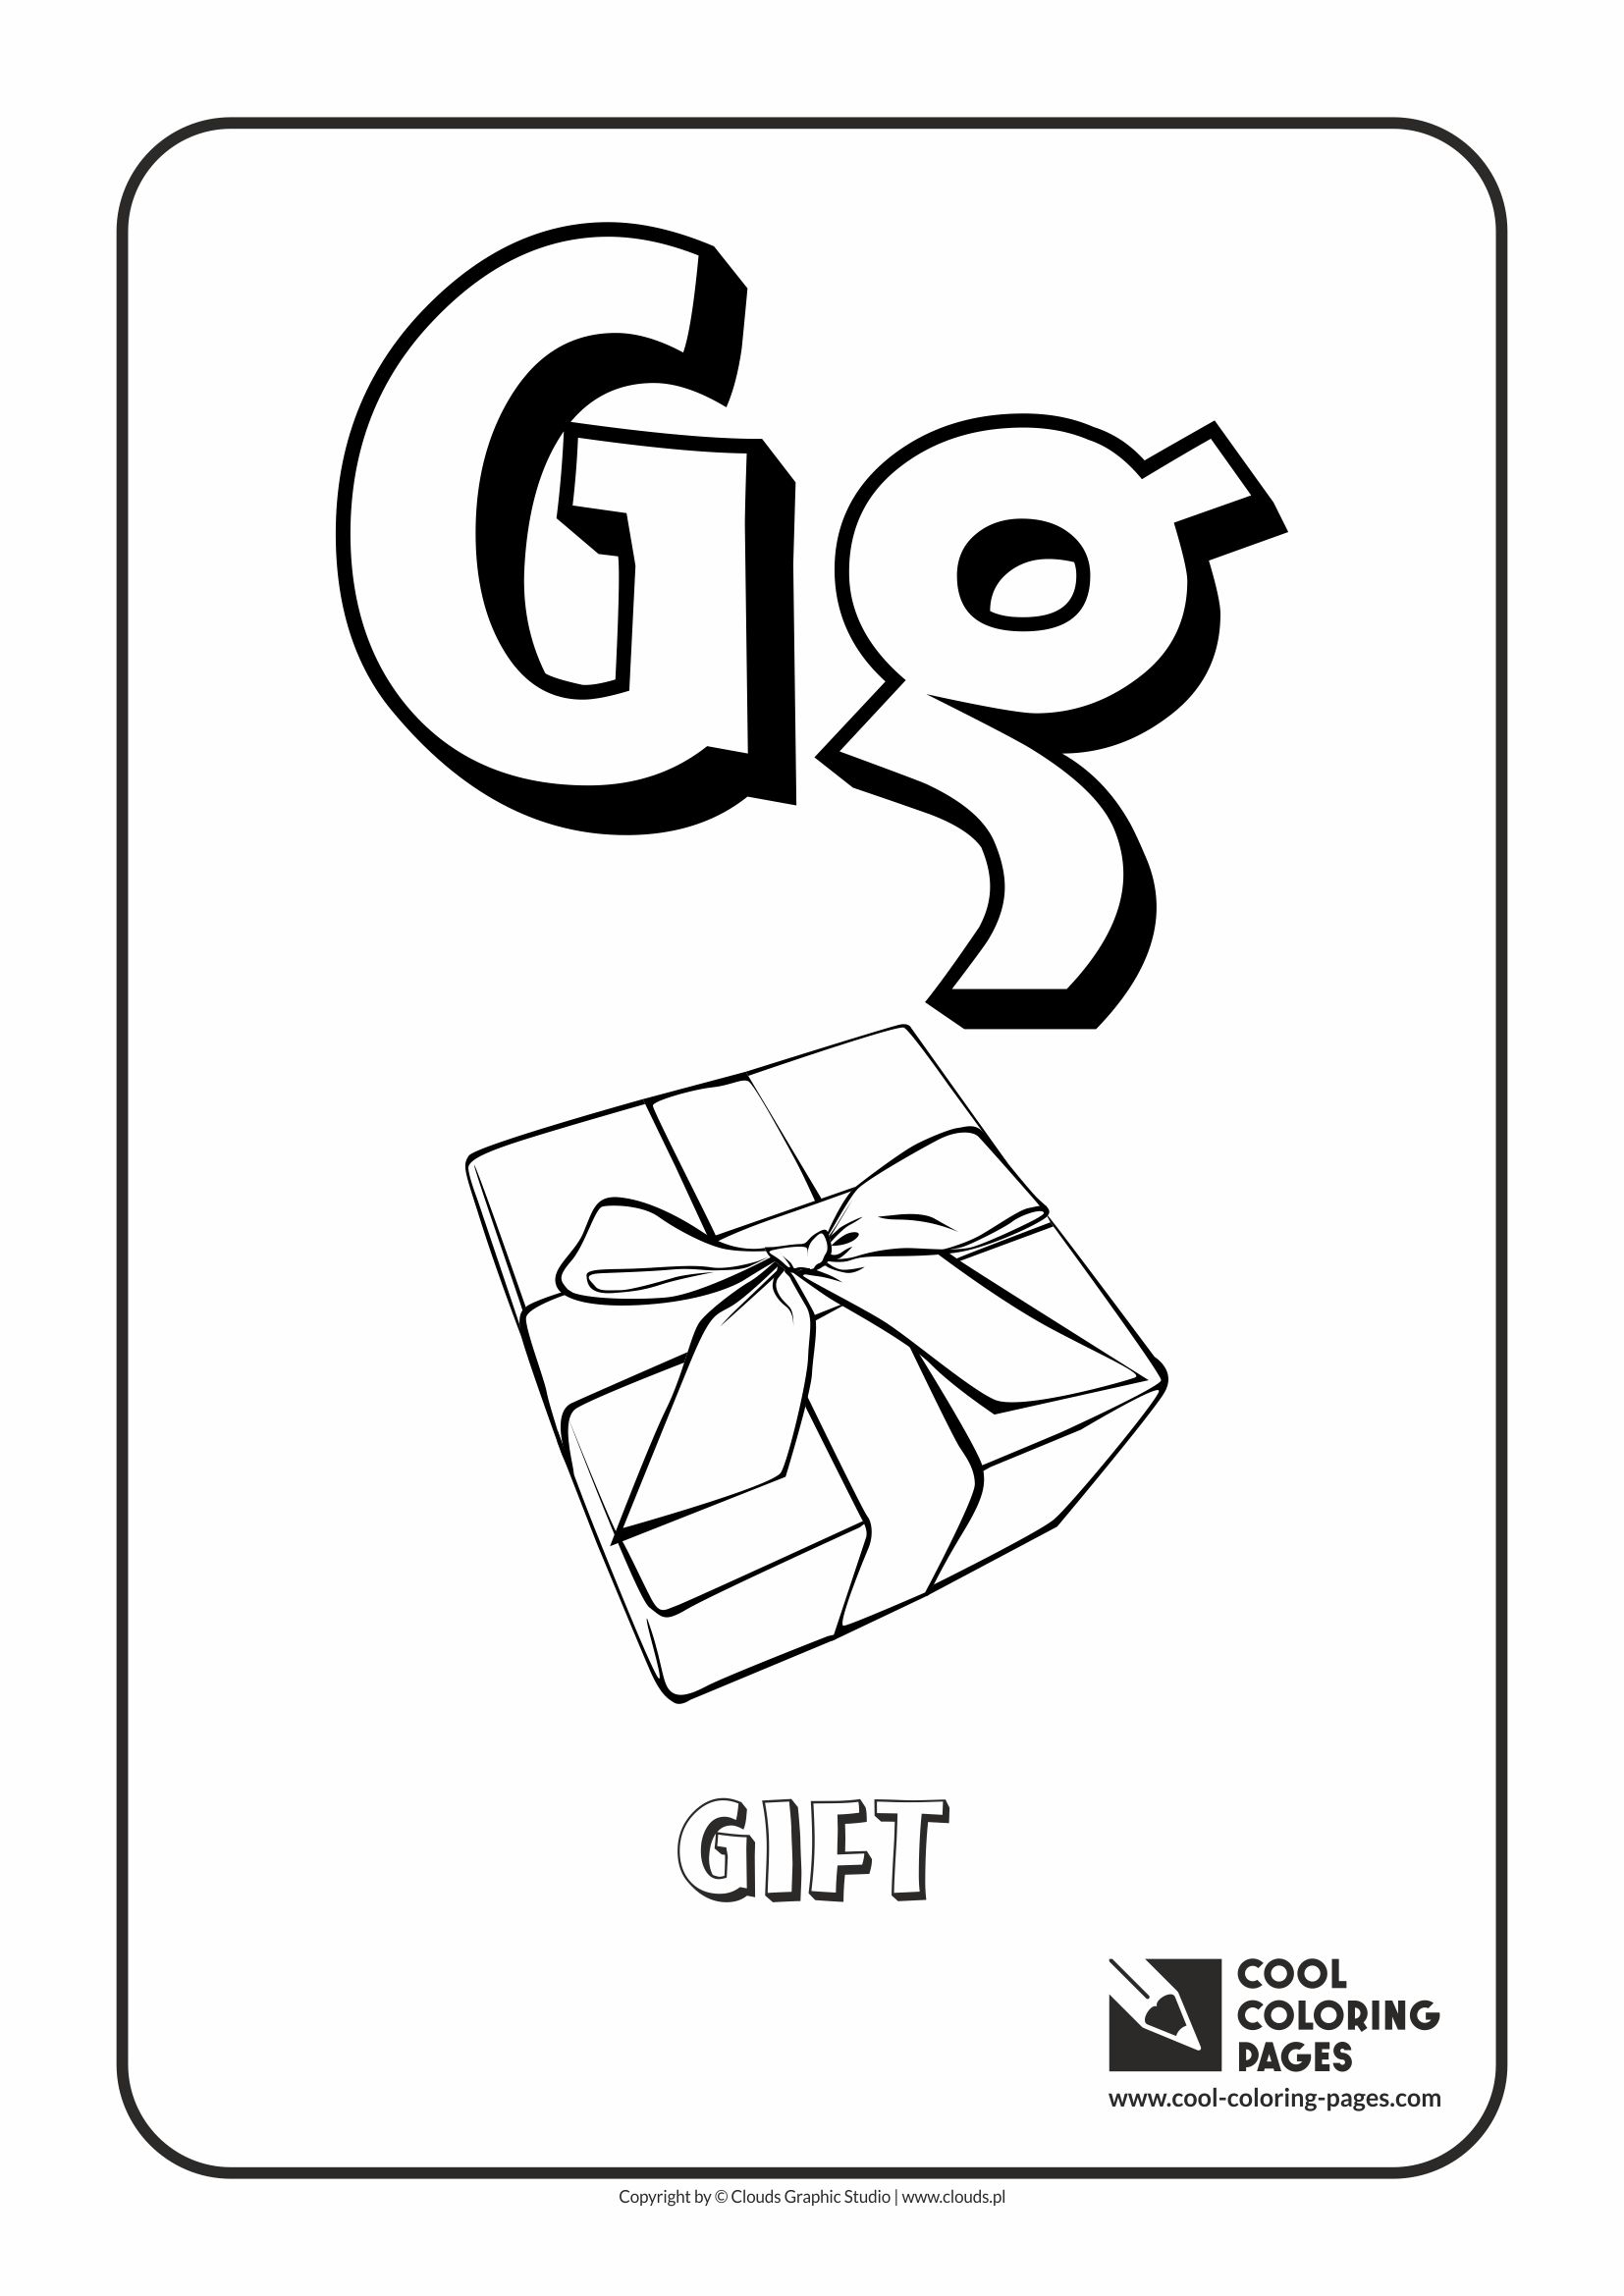 Cool coloring pages letter g